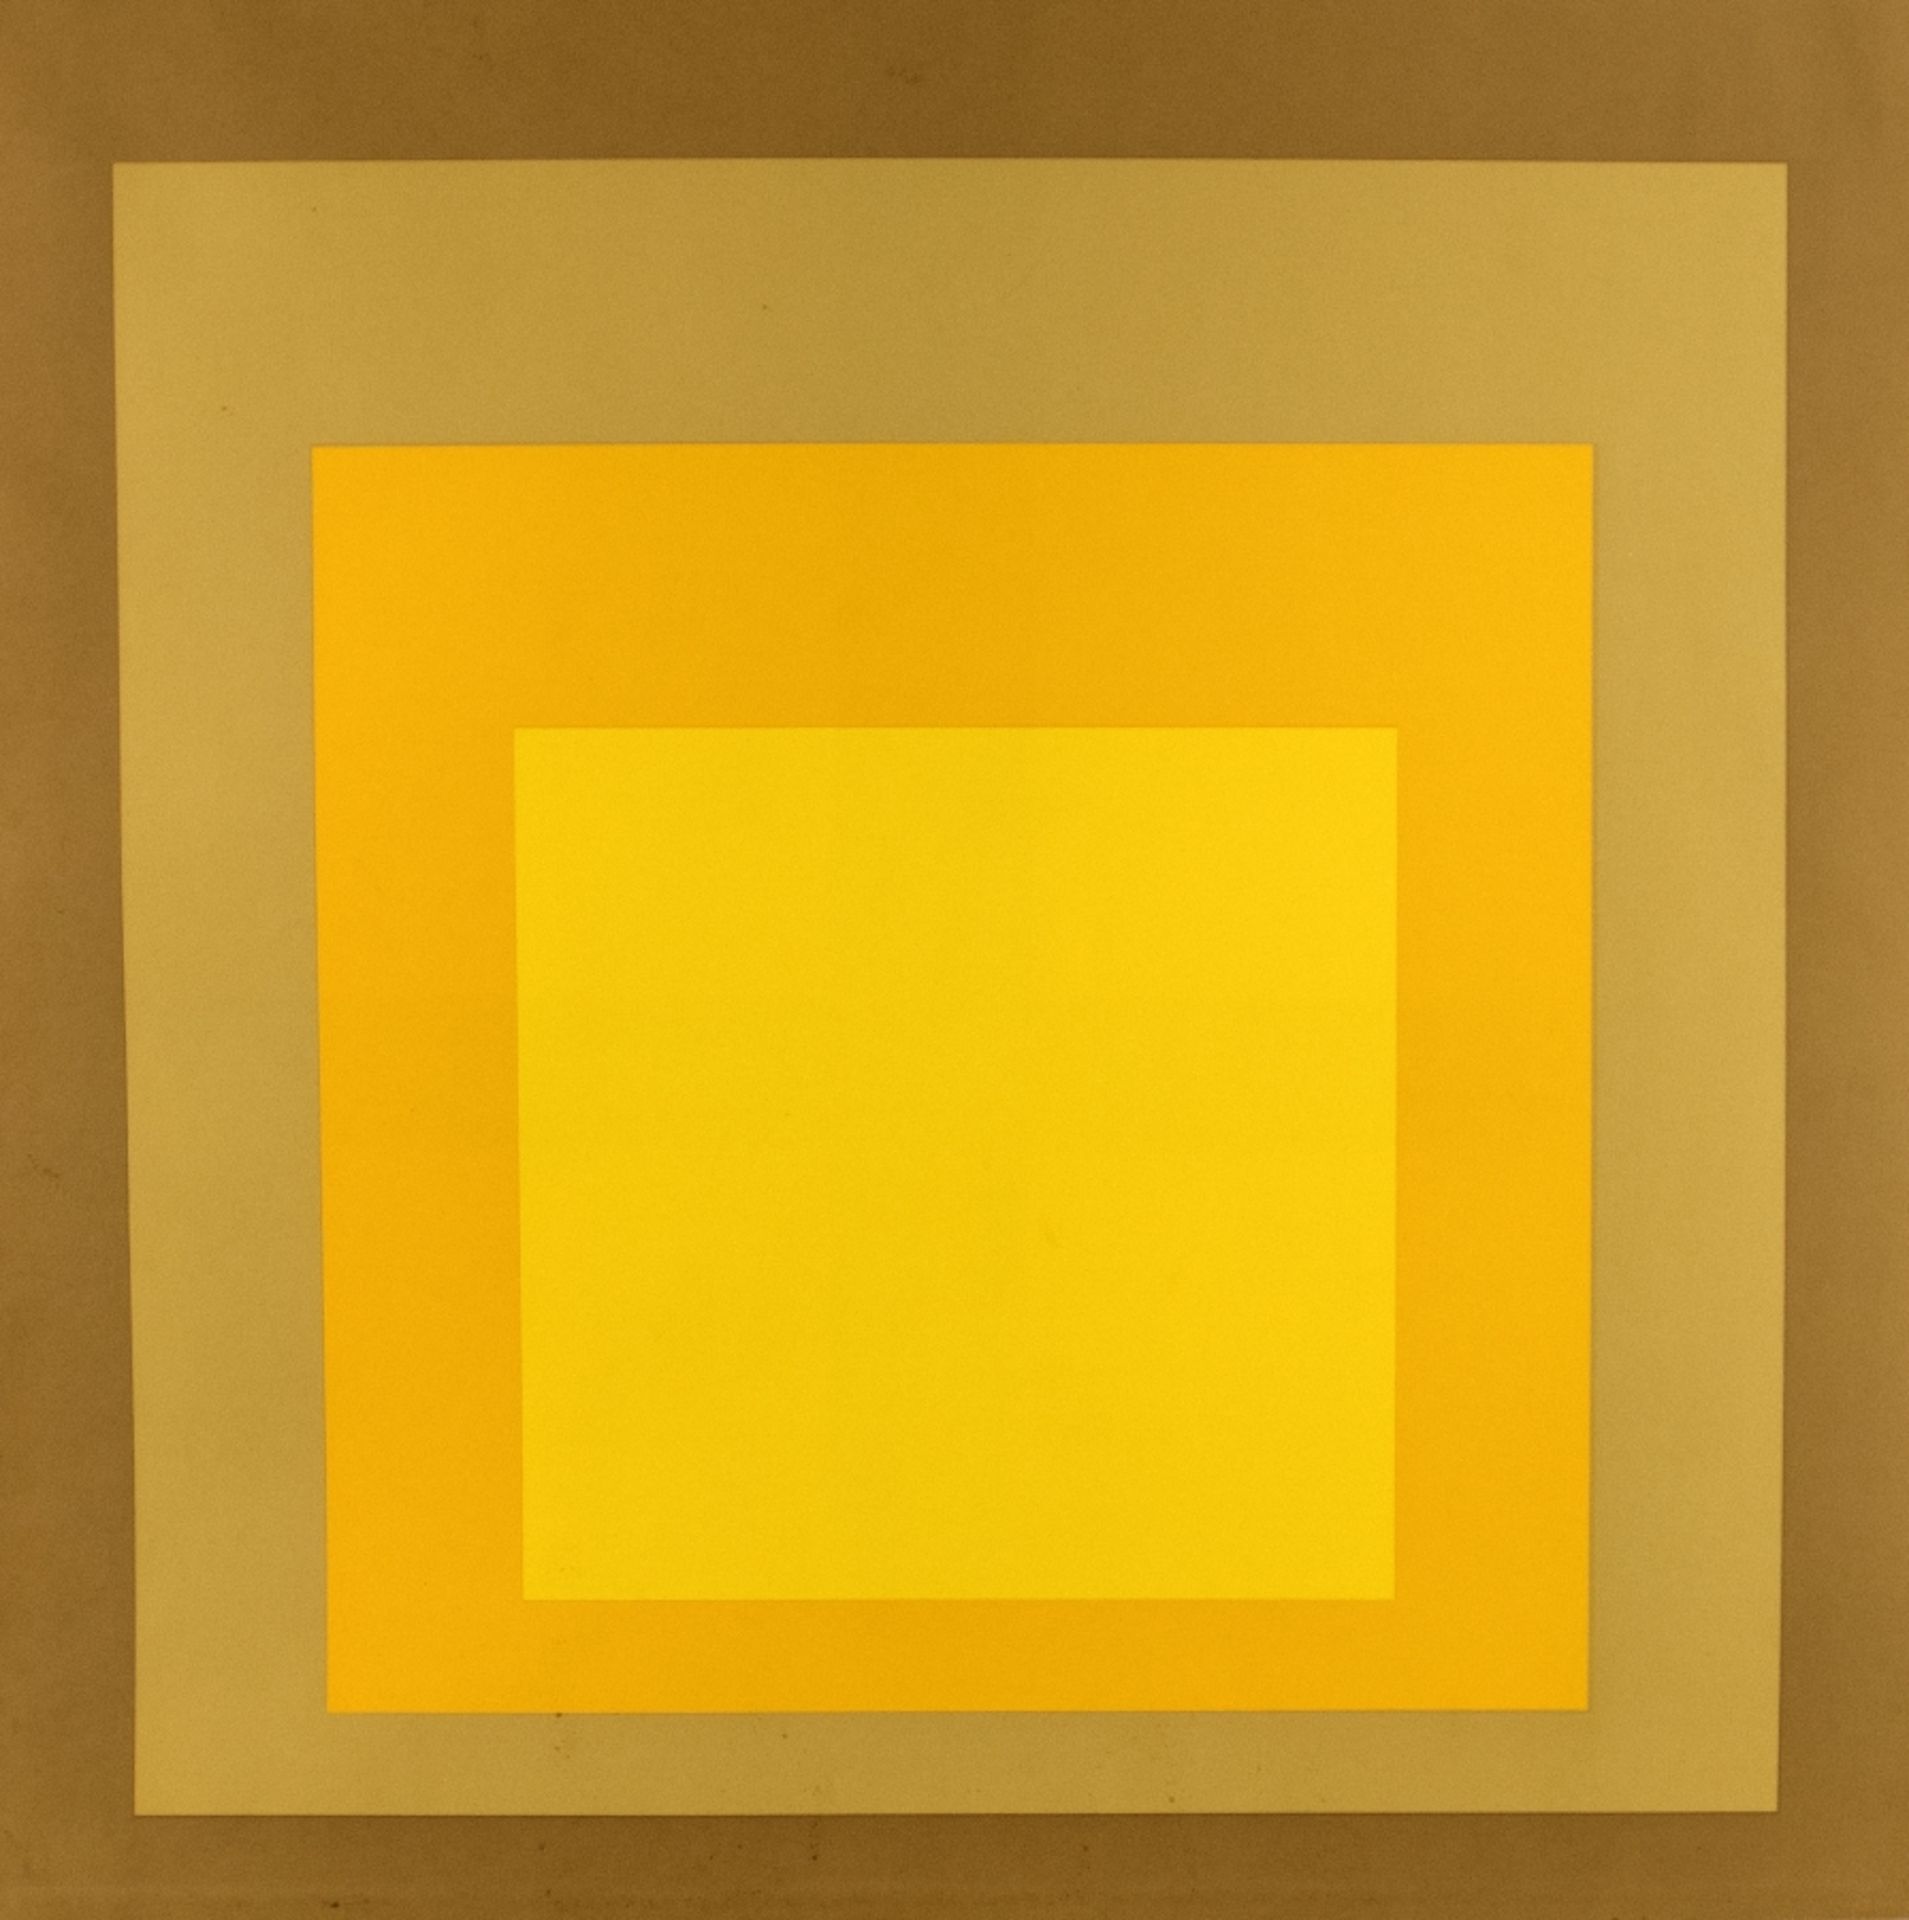 Albers, Josef: Hommage to the square